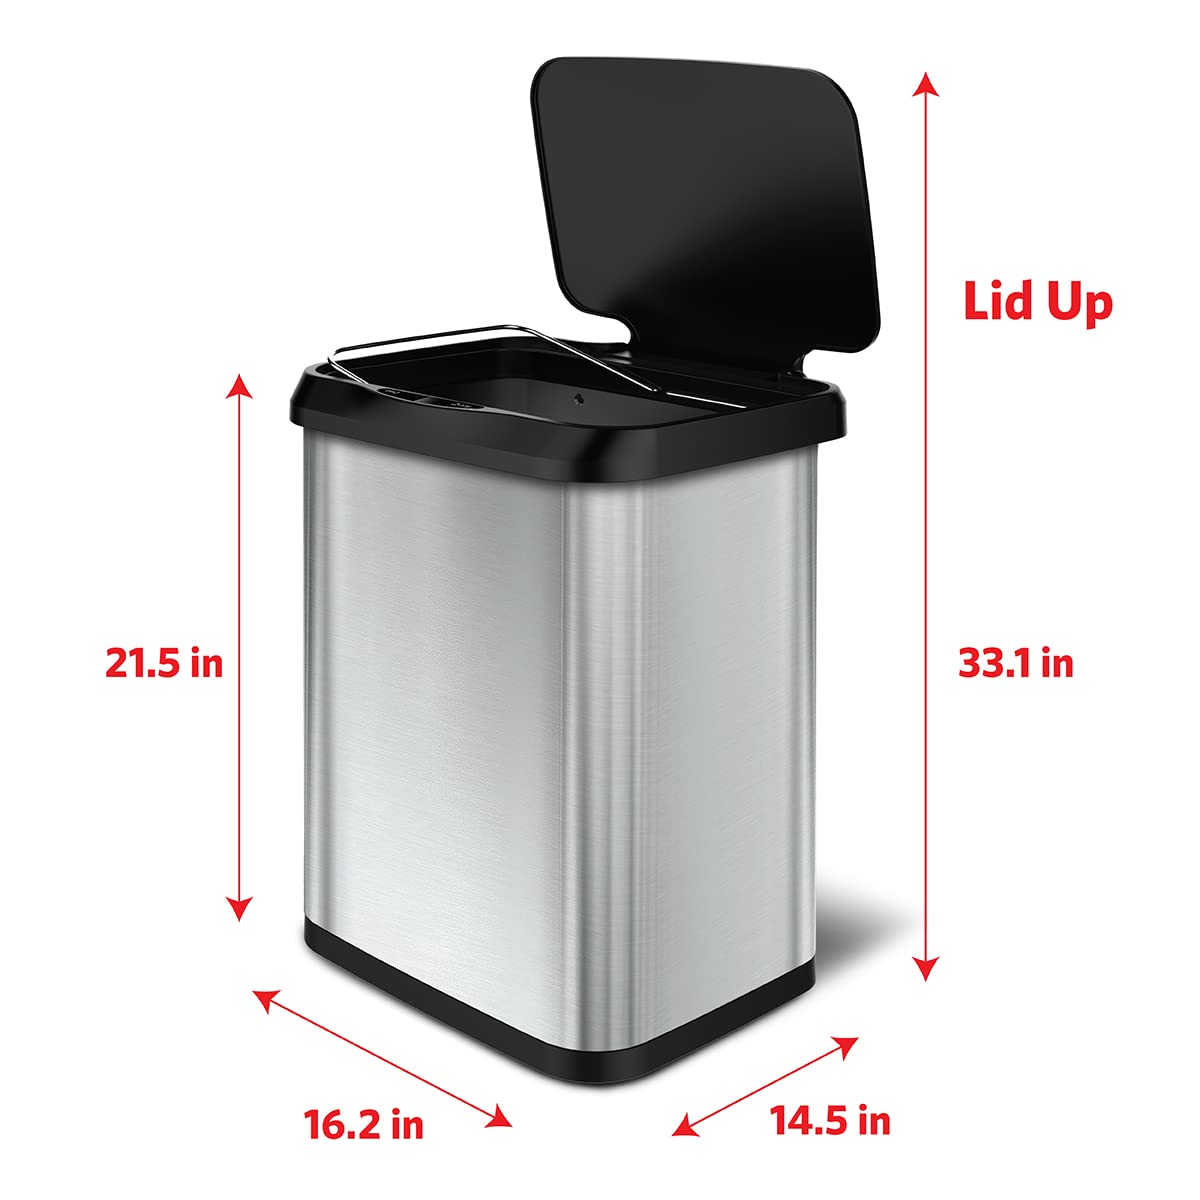 https://bigbigmart.com/wp-content/uploads/2023/05/Glad-Stainless-Steel-Trash-Can-with-Clorox-Odor-Protection-Touchless-Metal-Kitchen-Garbage-Bin-with-Soft-Close-Lid-and-Waste-Bag-Roll-Holder-13-Gallon-Motion-Sensor4.jpg